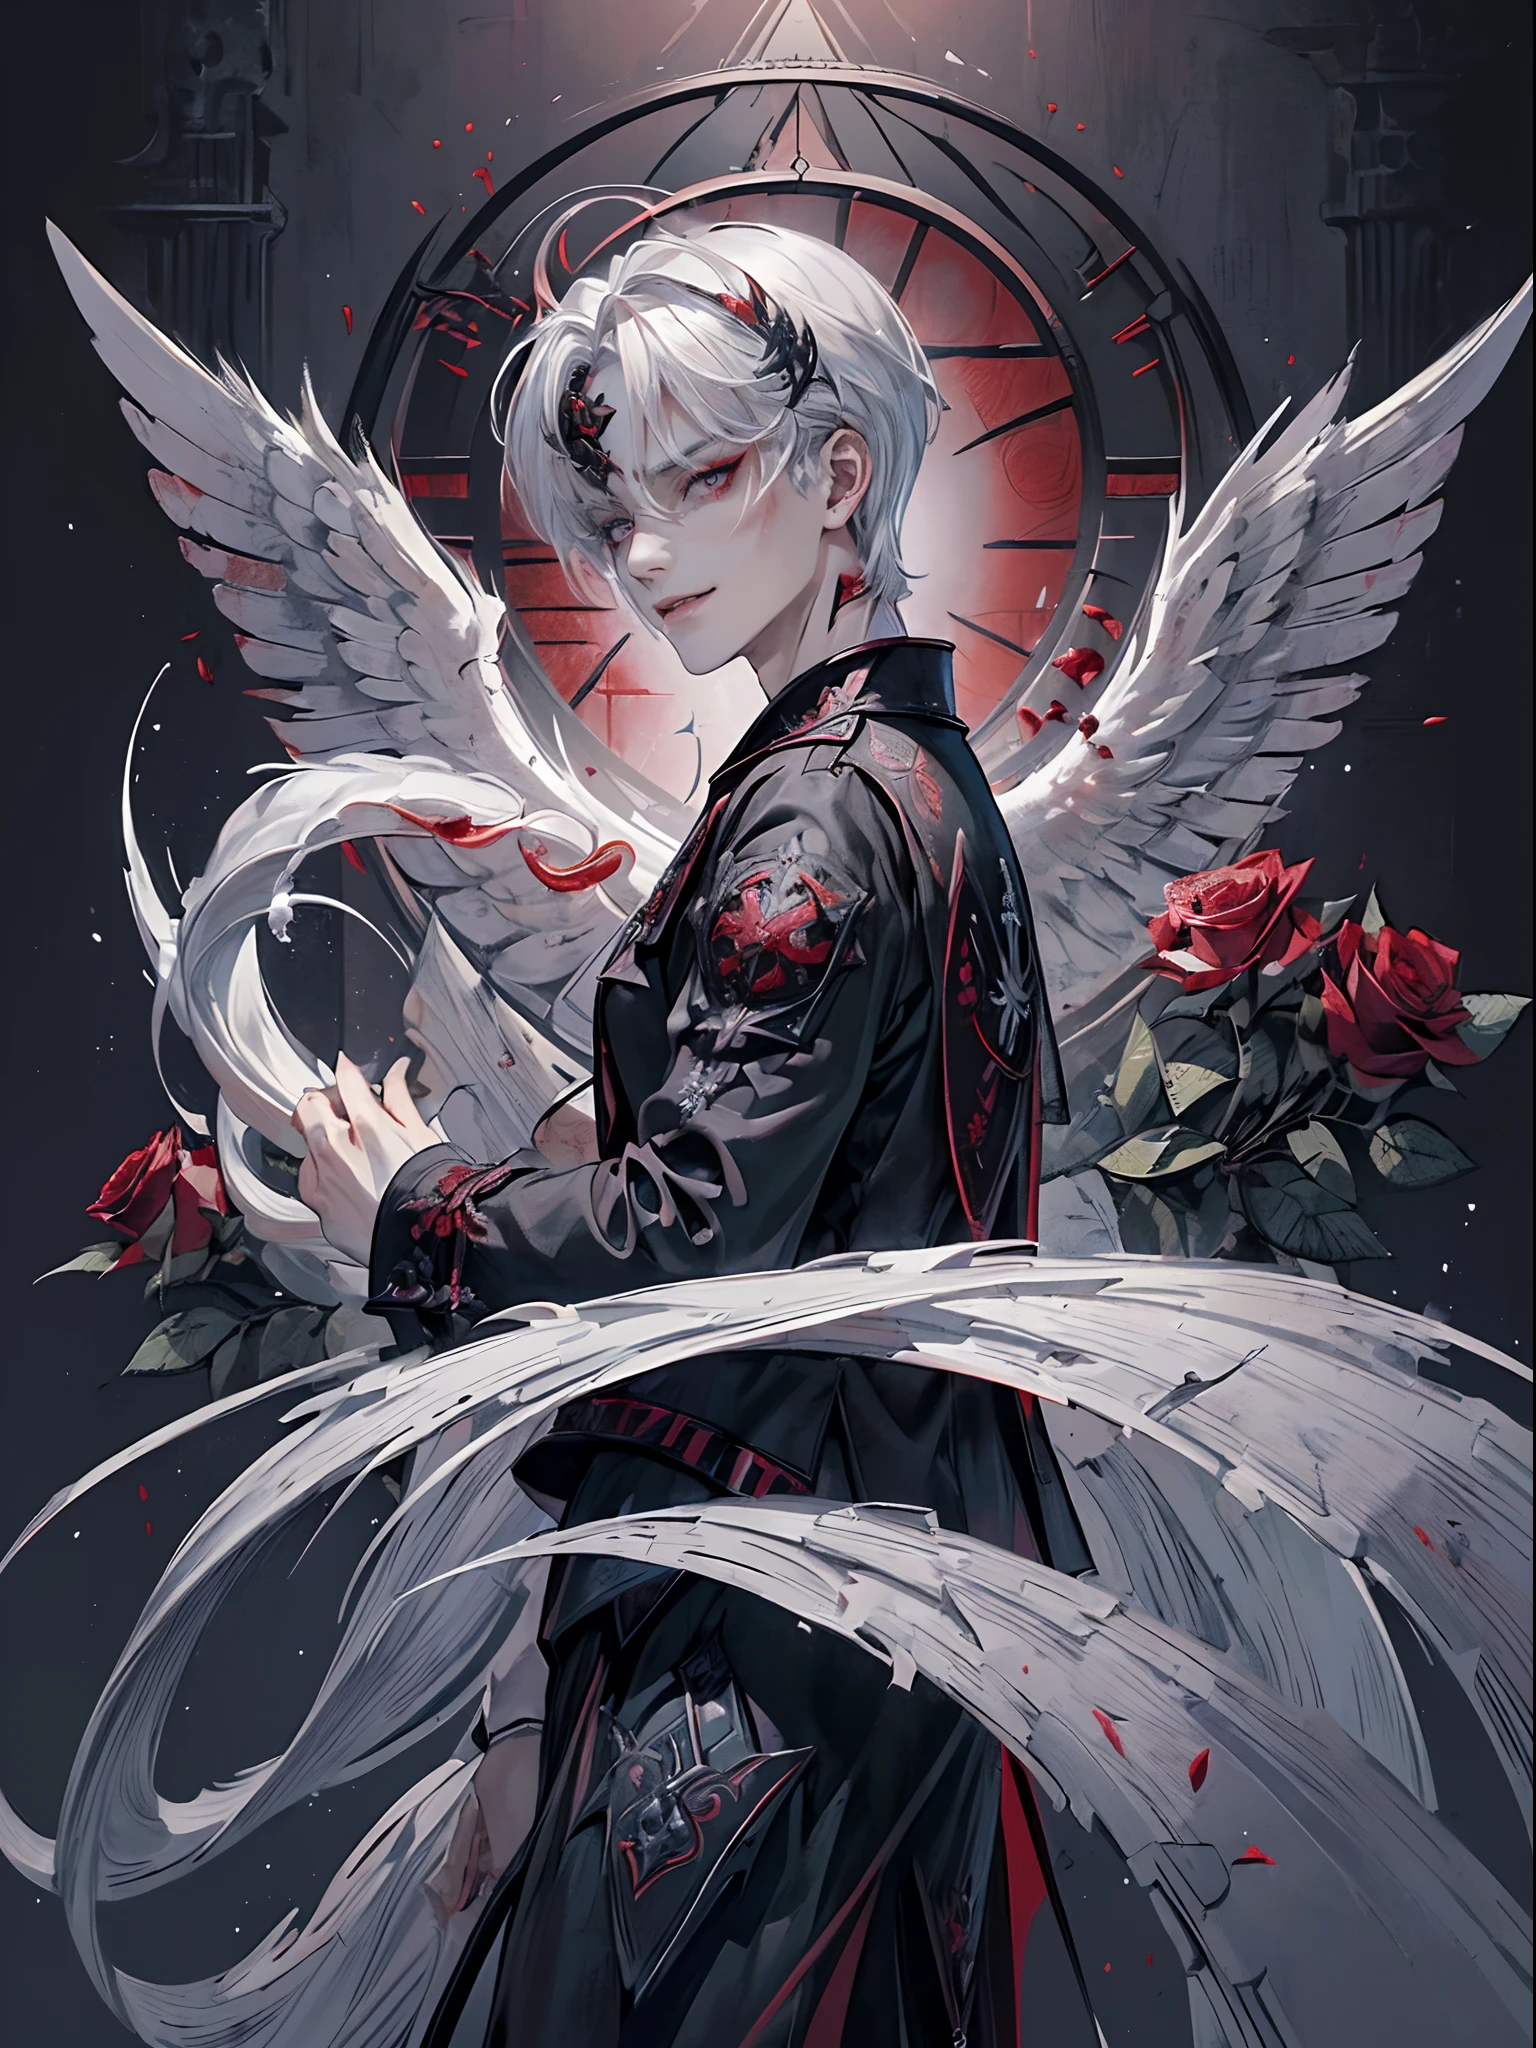 ((4K works))、​masterpiece、（top-quality)、((high-level image quality))、((One Beautiful Fallen Angel Man))、Slim body、((Vampire Black Y-Shirt Fashion))、(Detailed beautiful eyes)、((Red roses and crows on fantastic black background))、Inside the Evil Castle、((Face similar to Chaewon in Ruseraphim))、((Long and gray-haired man with center division))、(((white  hair)))、((Smaller face))、((Neutral face))、((Red Eyes))、((Korean Male))、((50 years old))、((wild boy))、((Show your teeth and smile))、((Korean makeup with black eyeshadow))、((elongated and sharp eyes))、(((Shot alone)))、((Fallen Angel))、Photos of fallen angels、Villain、Dark Proof、((Shot diagonally from the side))、King of Fallen Angels、Evil King